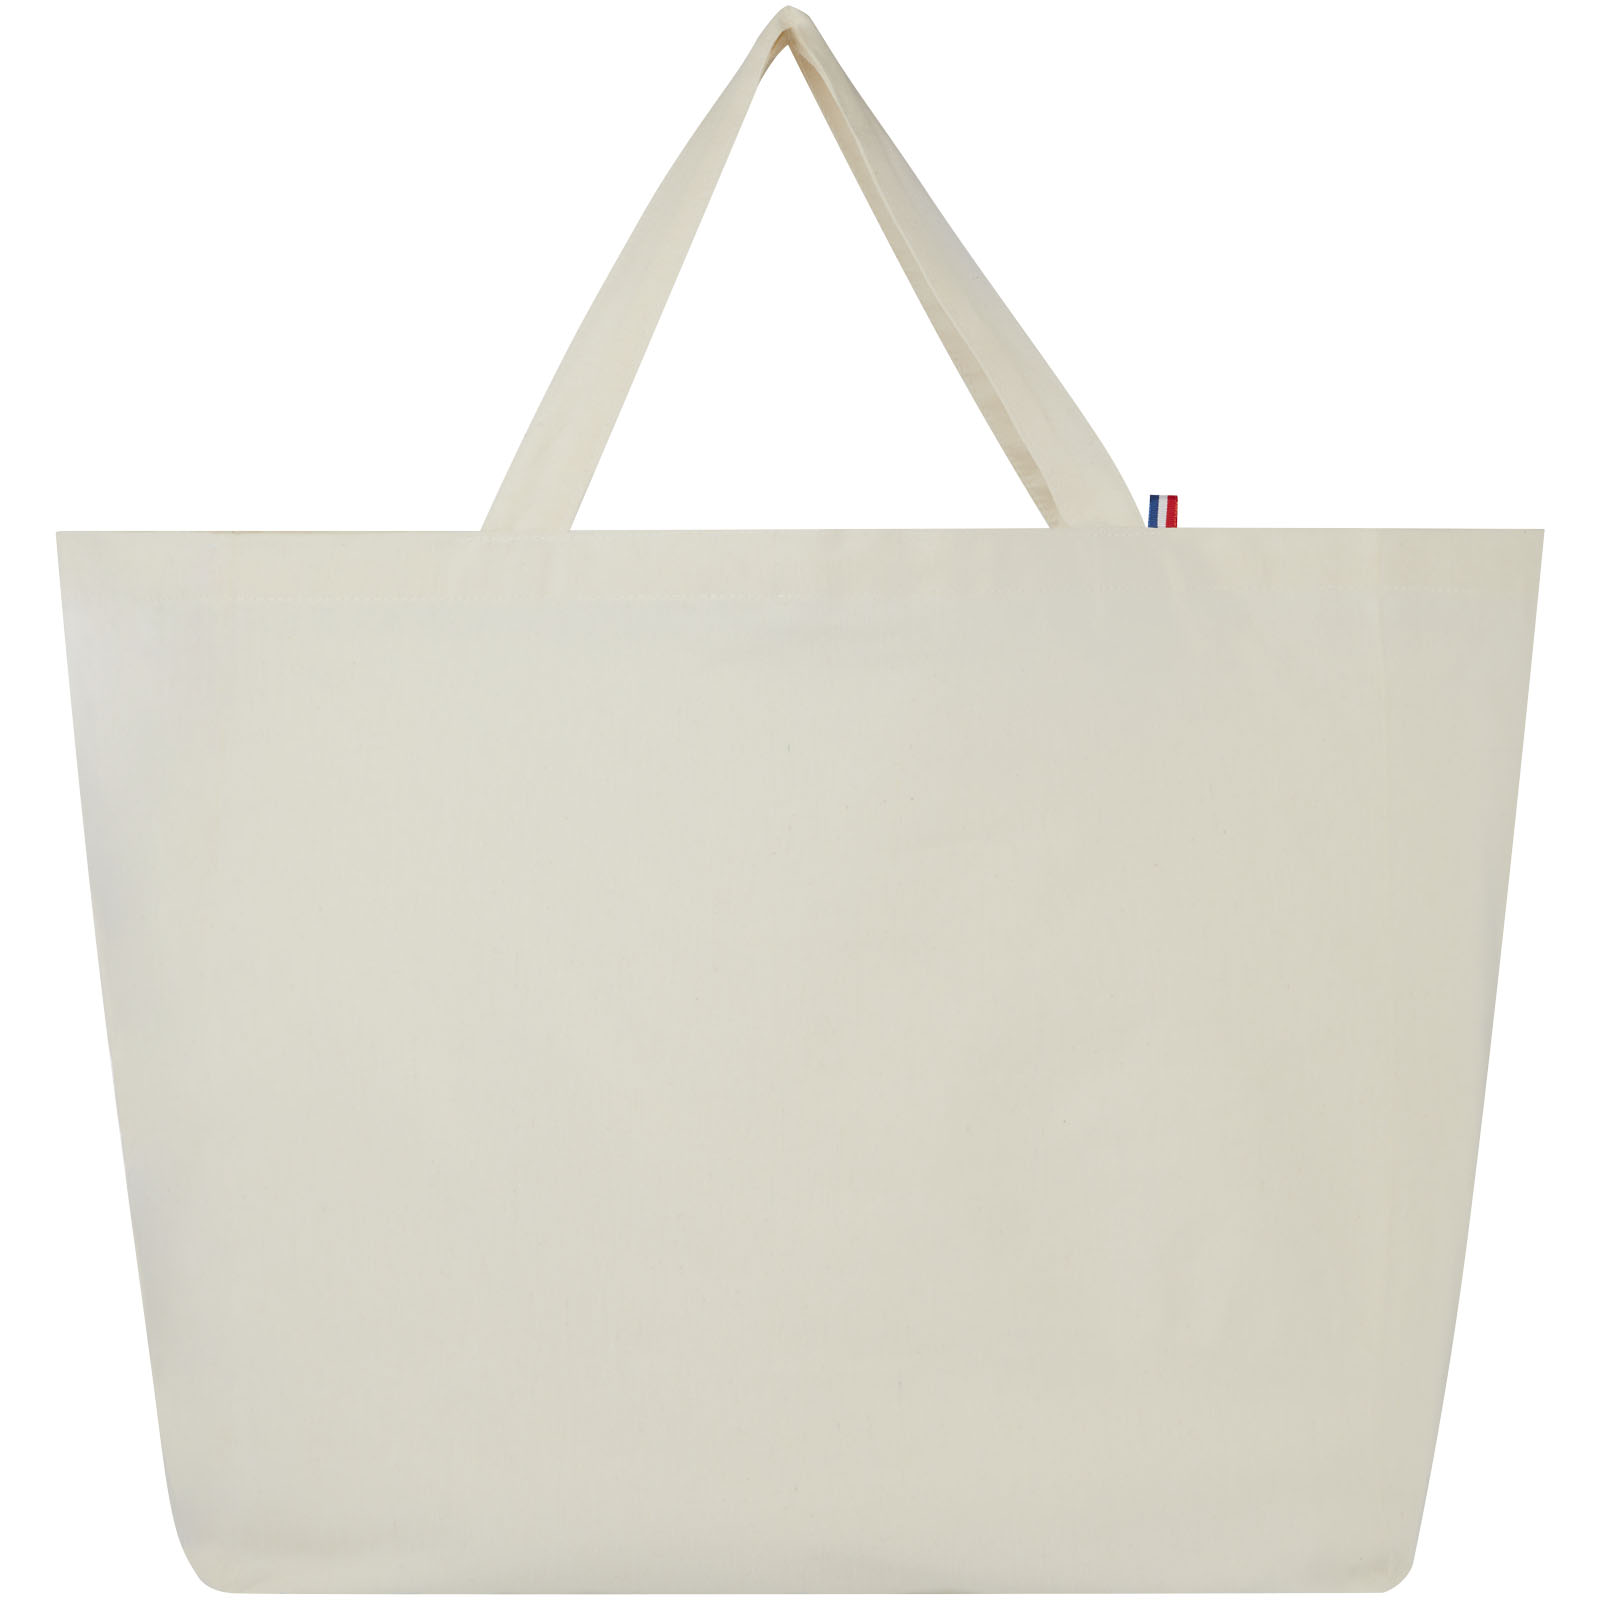 Advertising Shopping & Tote Bags - Cannes 200 g/m2 recycled shopper tote bag 10L - 1